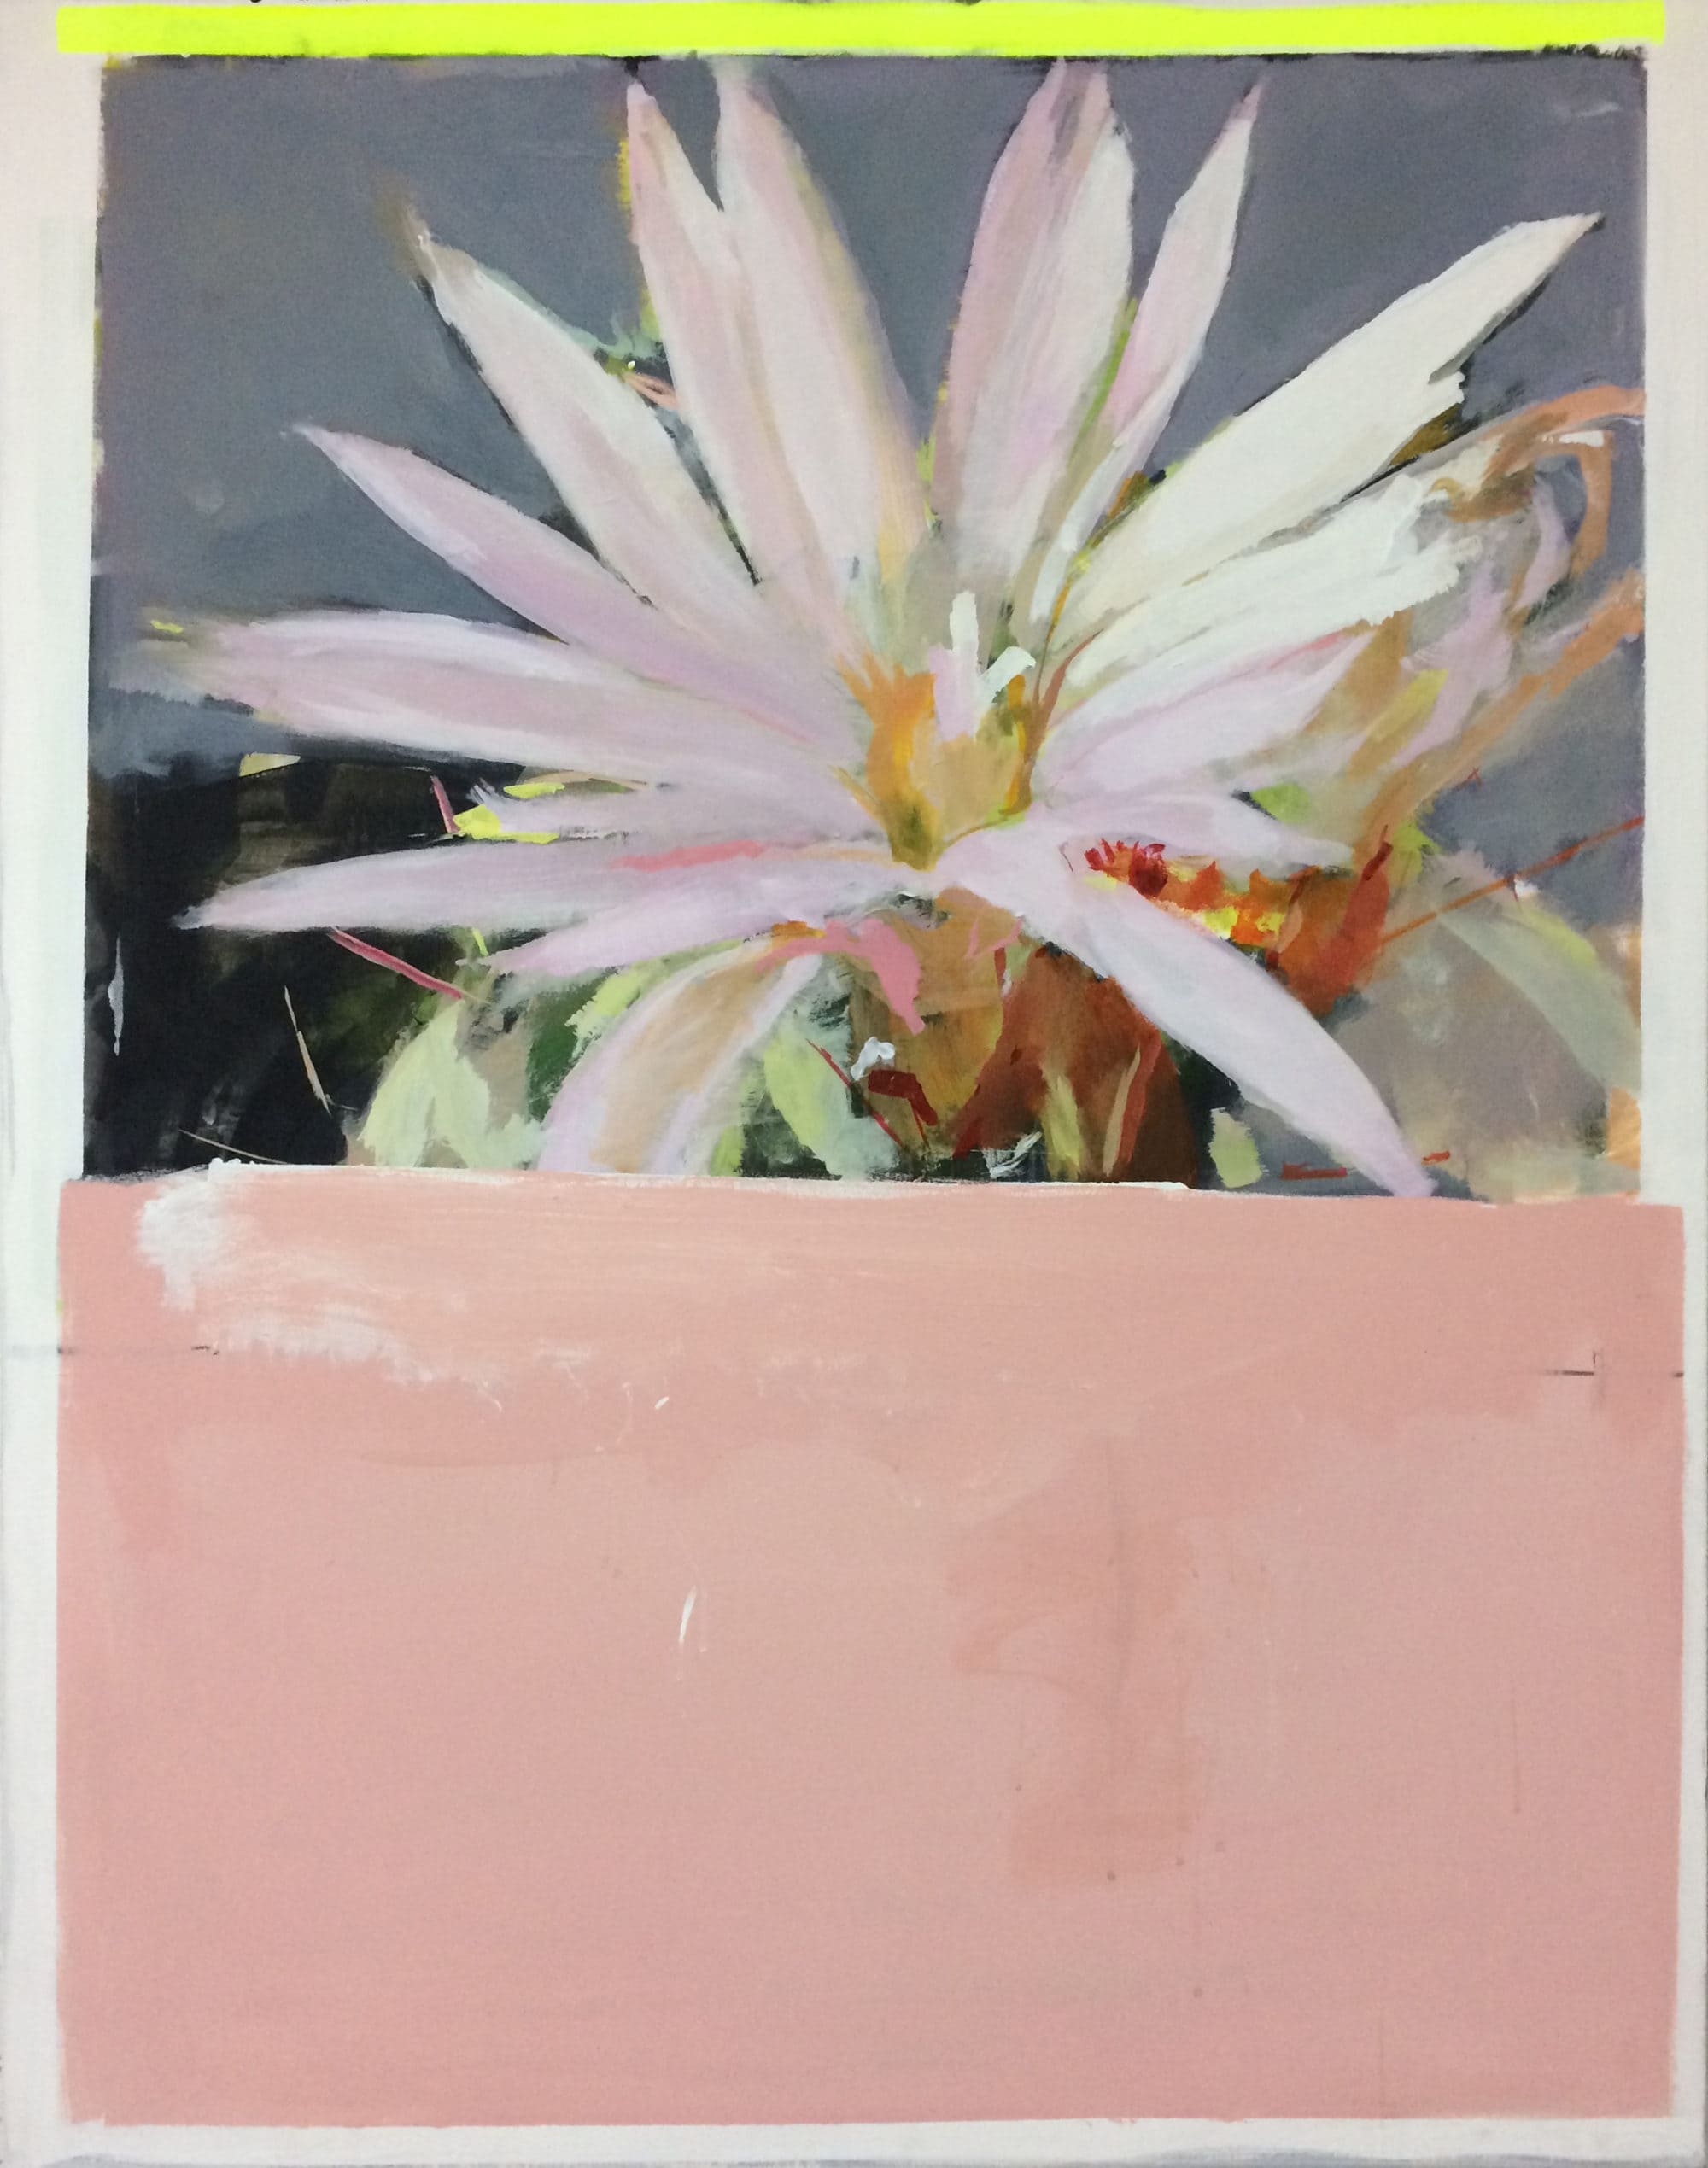 Michael_Harnish_CACTUS FLOWER I_60 x 48 inches_oil